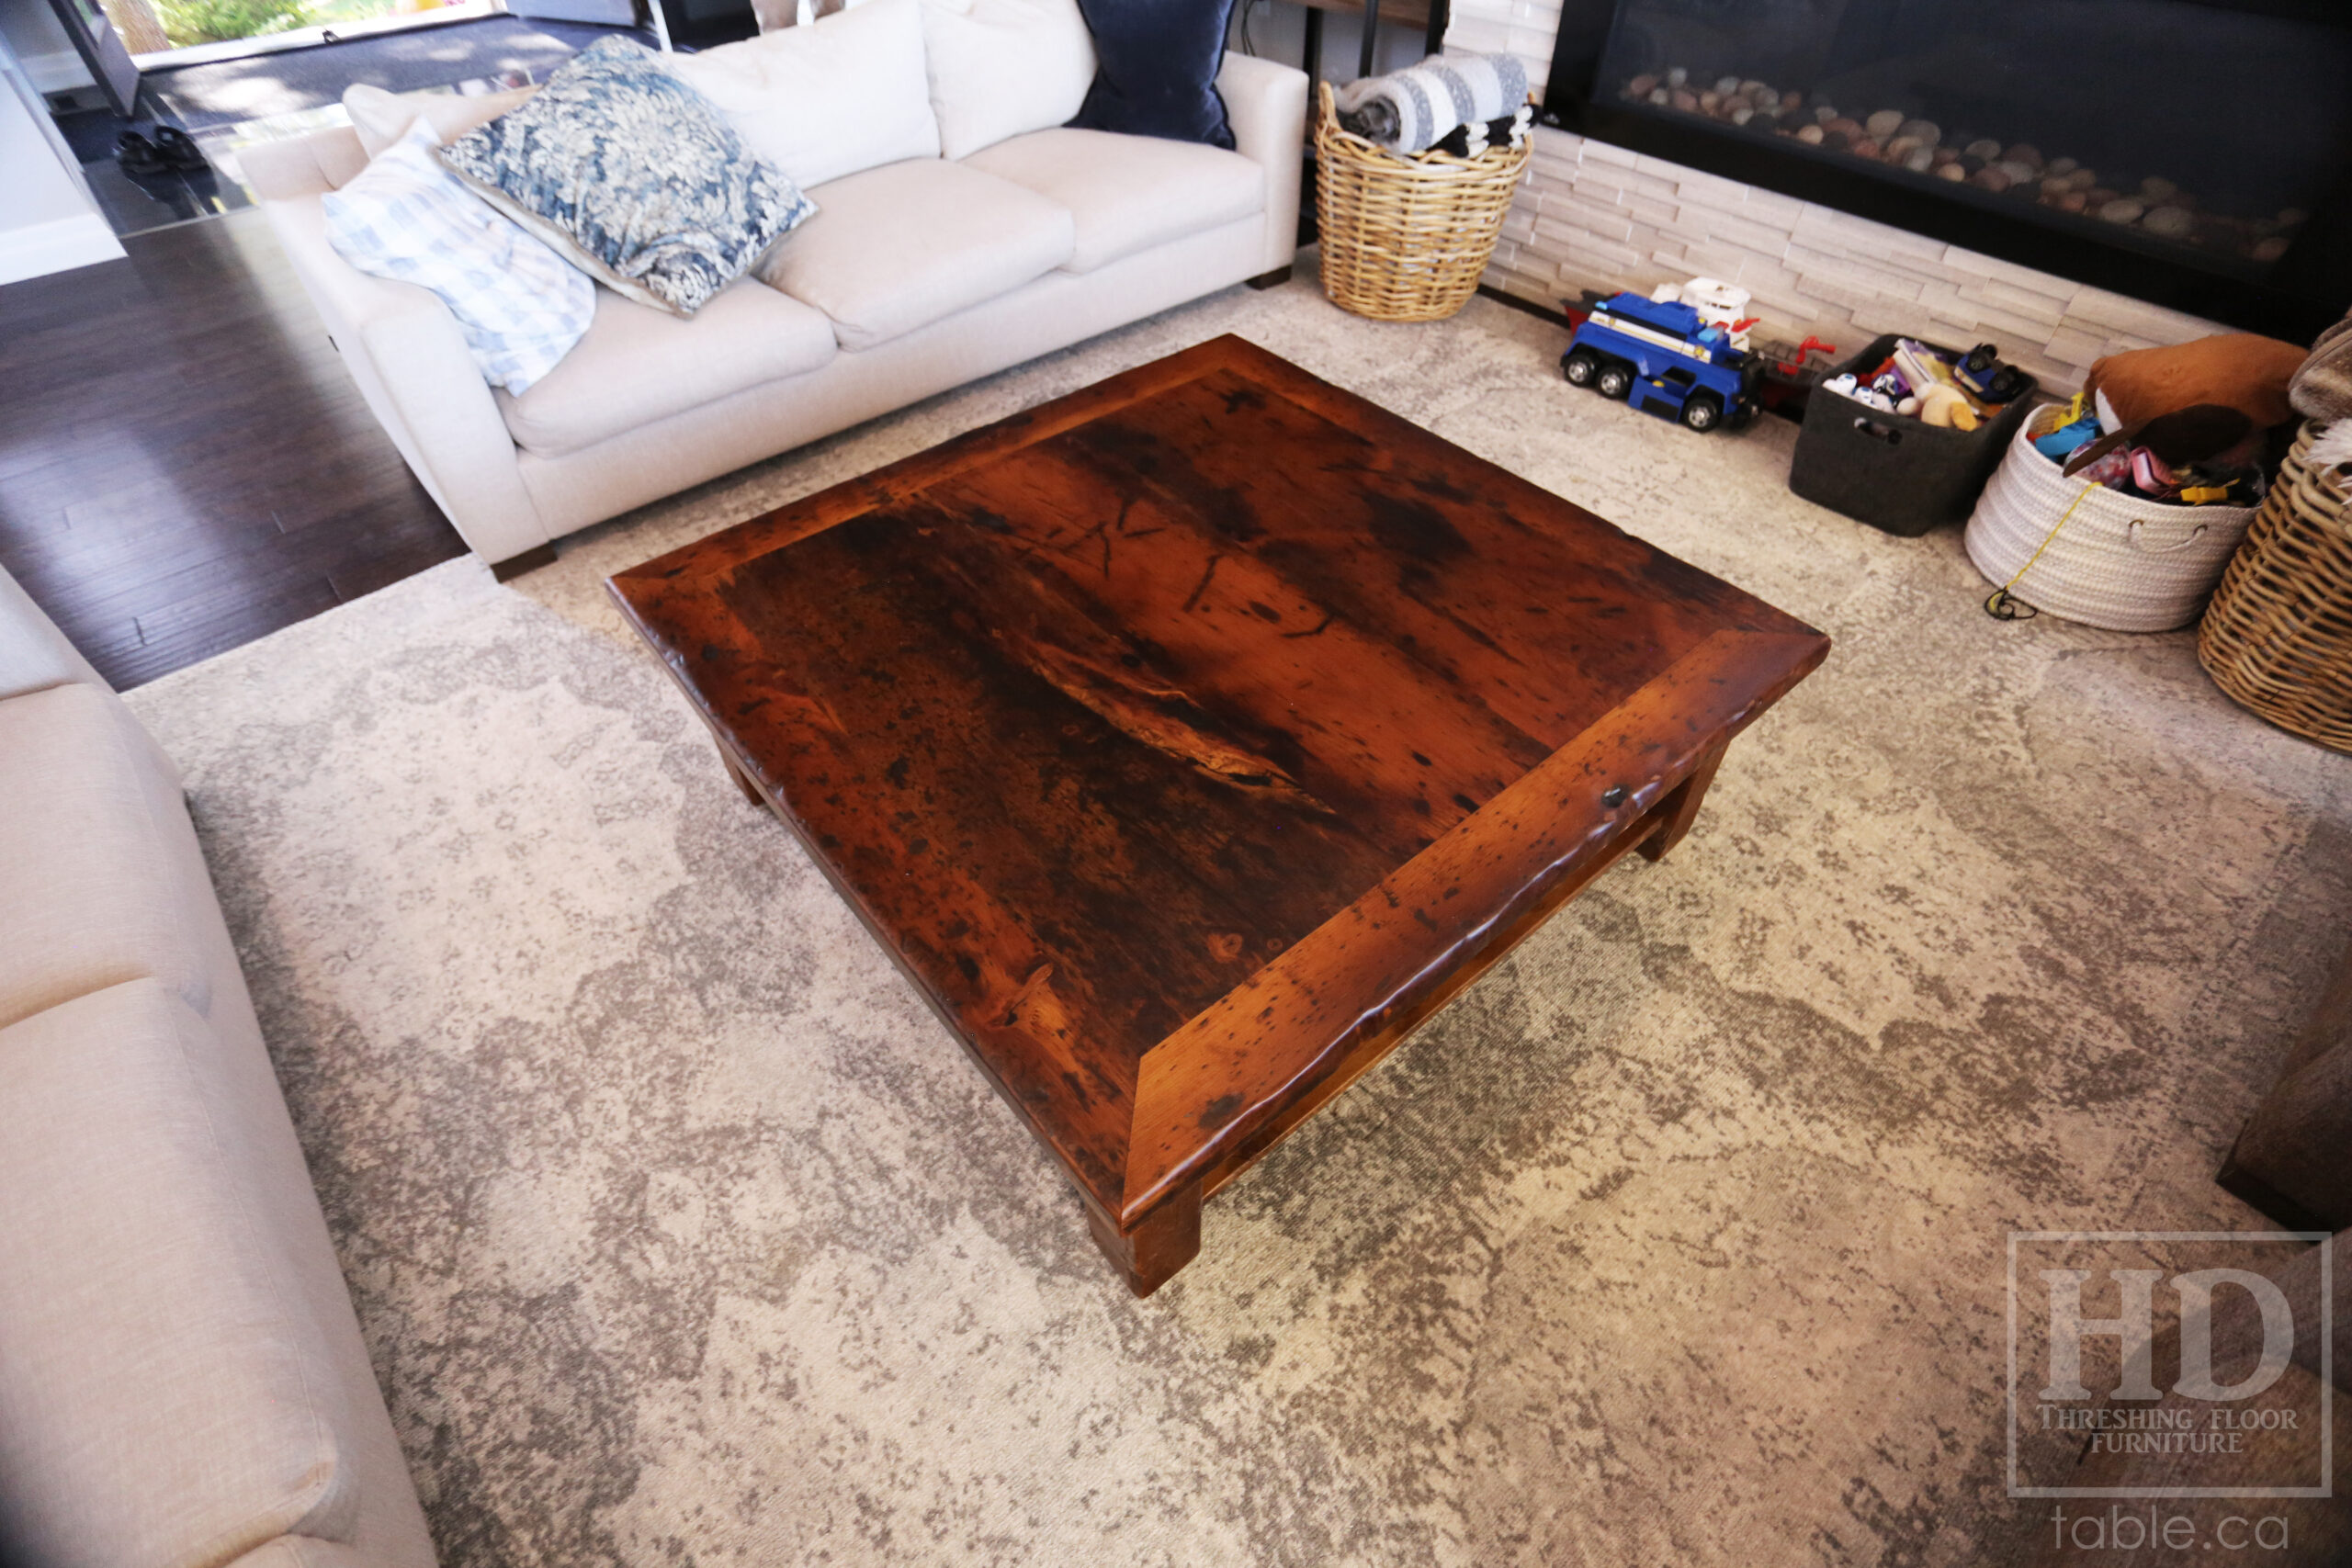 4’x4’ Reclaimed Ontario Barnwood Coffee Table we made for a Saria, Ontario home - 16" height – Straight 4”X4” Windbrace Beam Legs - Old Growth Hemlock Threshing Floor Construction – Mitred Bread Edge Corners - Original edges & distressing maintained - Premium epoxy + matte polyurethane finish - www.table.ca